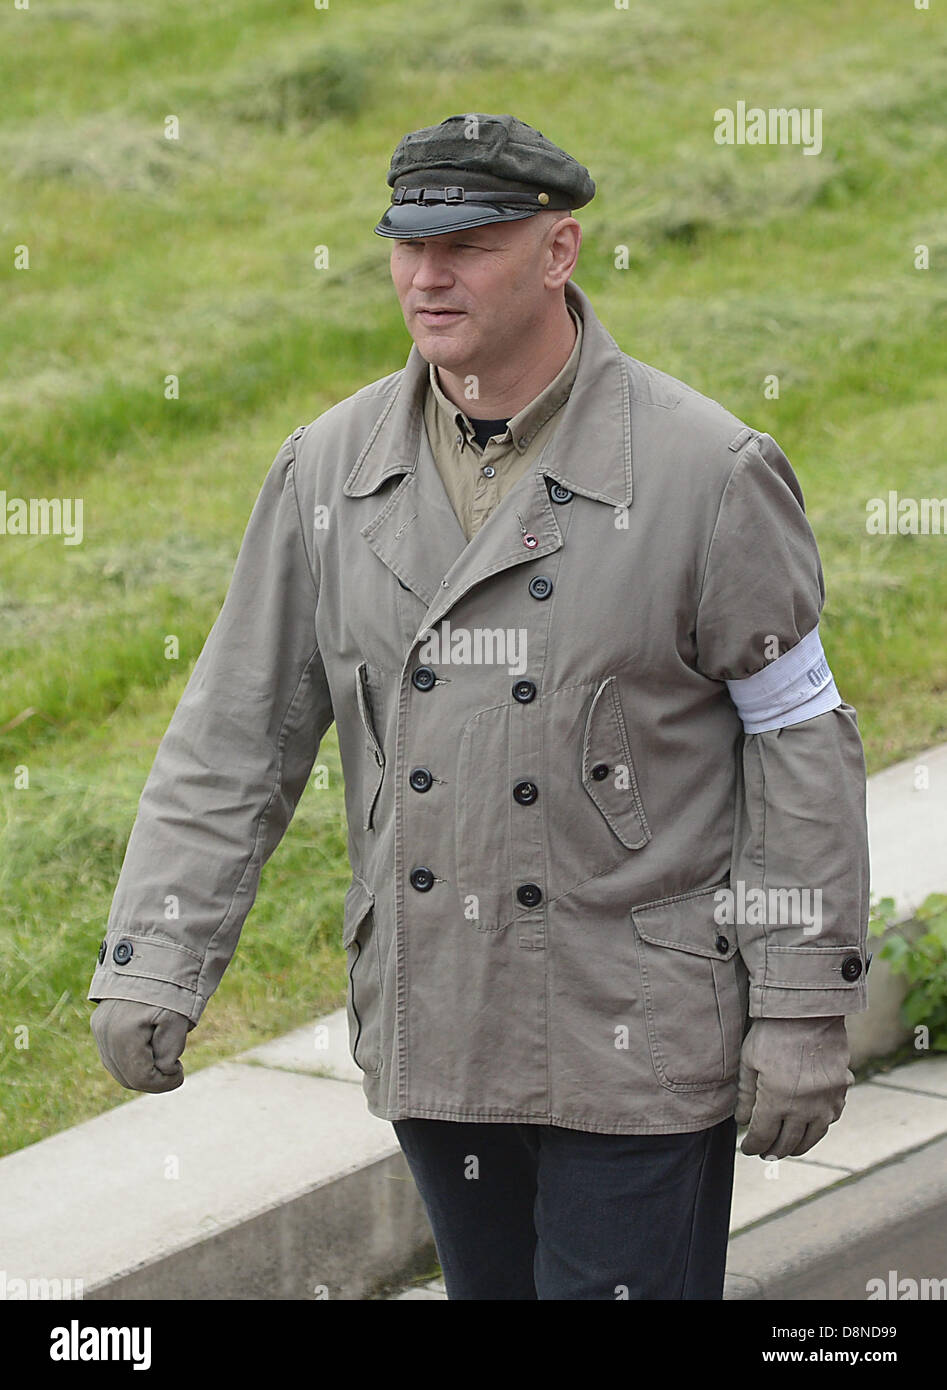 Wolfsburg, Germany. 1st June 2013. Right-wing extremist Thomas 'Steiner' Wulff walks the streets of Wolfsburg in Germany, 01 June 2013. Police expects 500 to 700 participants in the neonazi demonstration today. PHOTO: PETER STEFFEN/dpa/Alamy Live News Stock Photo